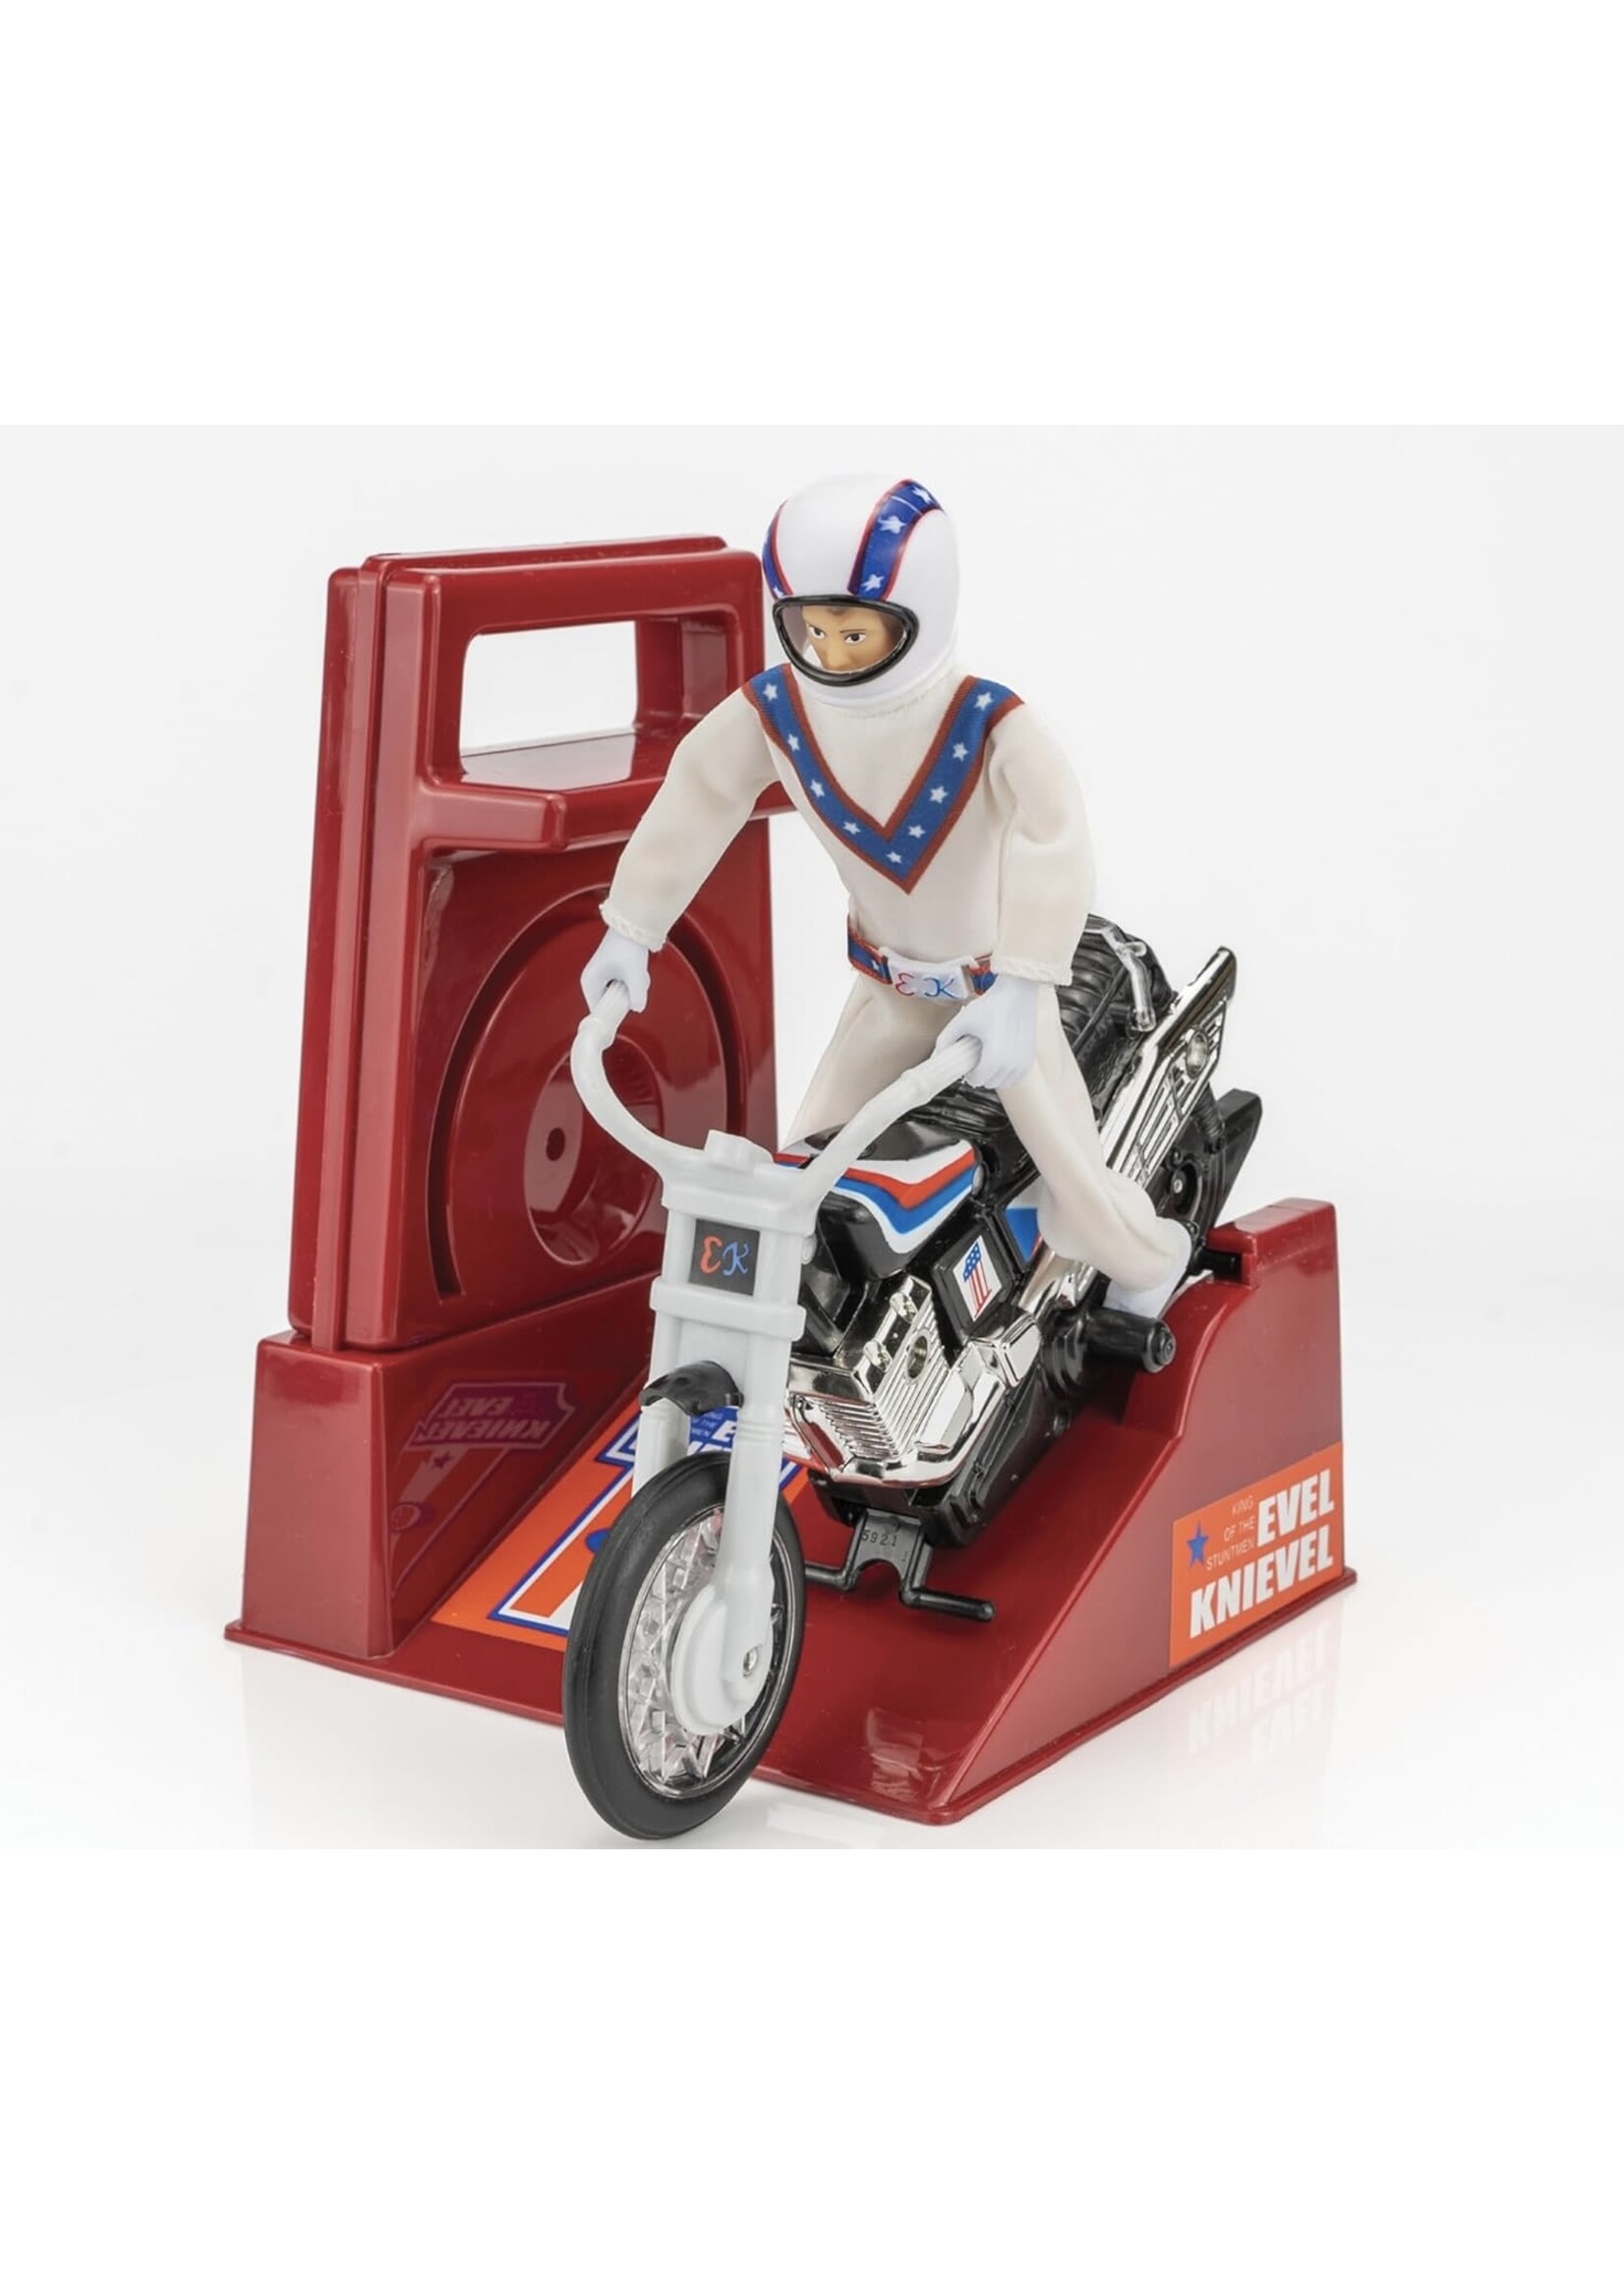 Evil Knievel Stunt Cycle